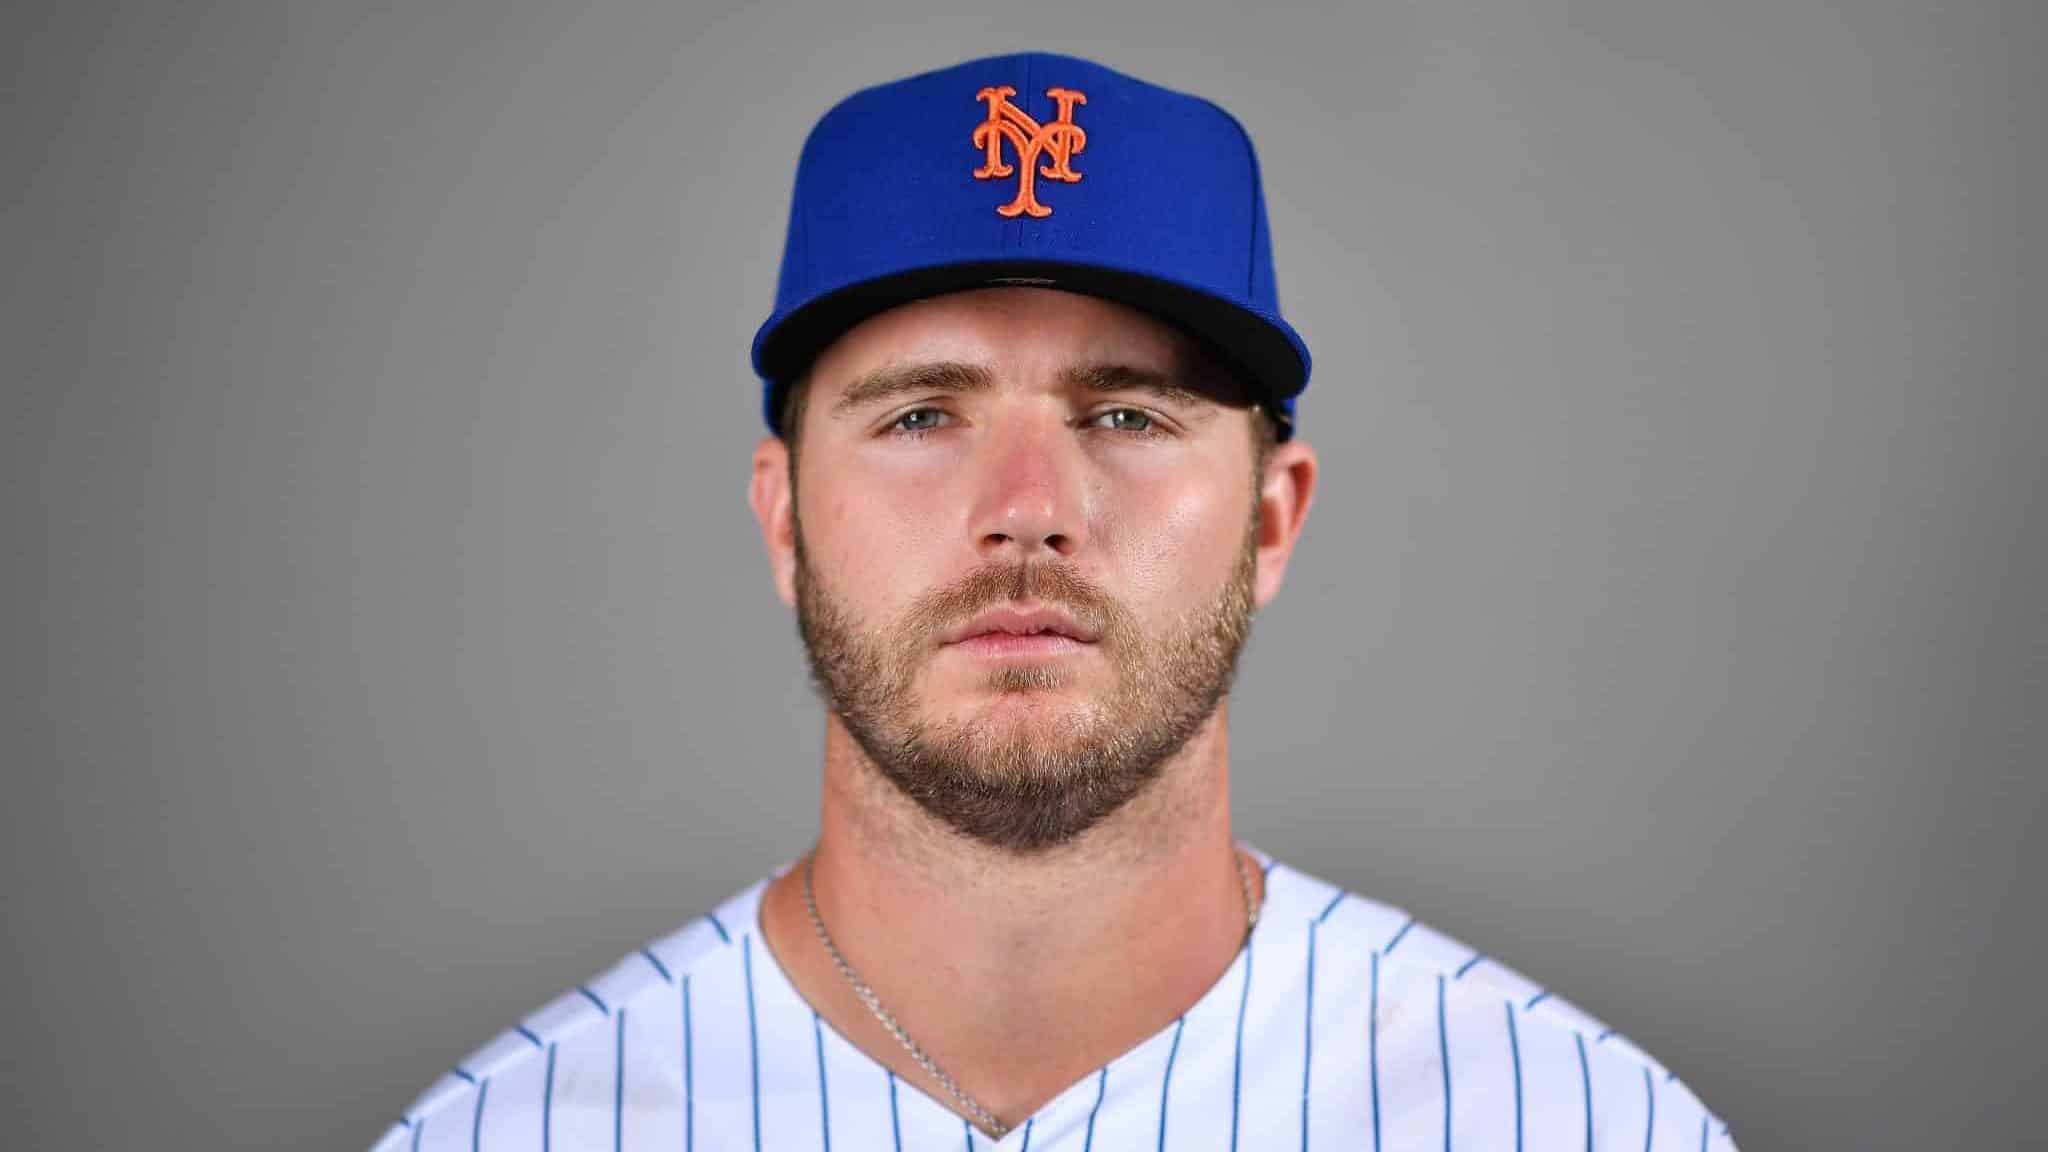 PORT ST. LUCIE, FLORIDA - FEBRUARY 20: Pete Alonso #20 of the New York Mets poses for a photo during Photo Day at Clover Park on February 20, 2020 in Port St. Lucie, Florida.